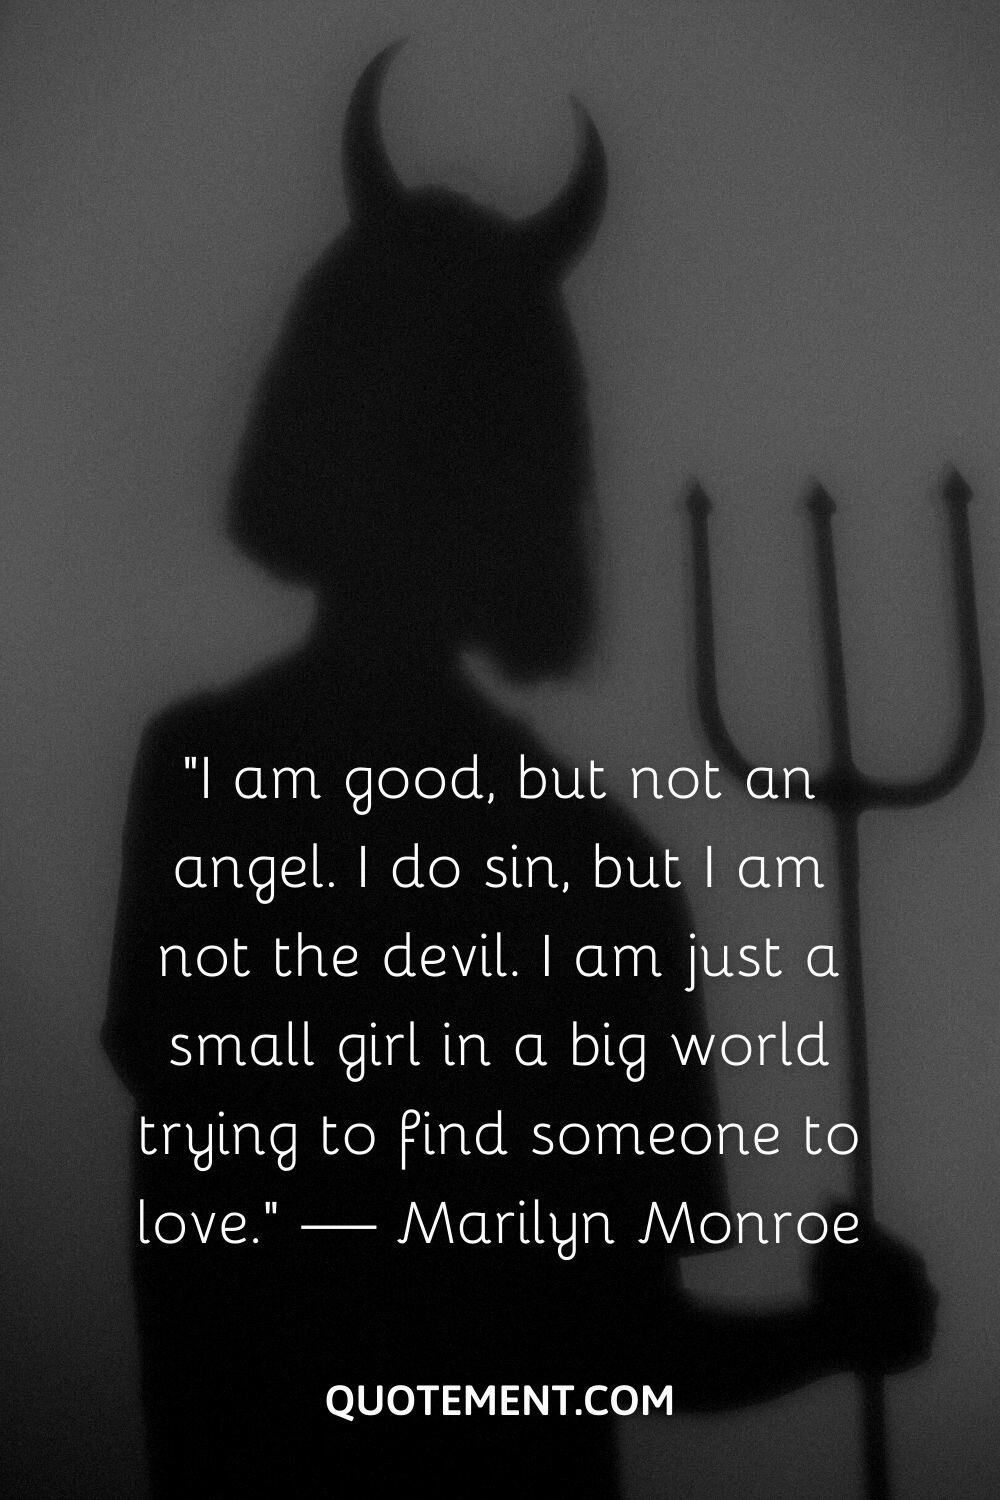 “I am good, but not an angel. I do sin, but I am not the devil. I am just a small girl in a big world trying to find someone to love.” — Marilyn Monroe